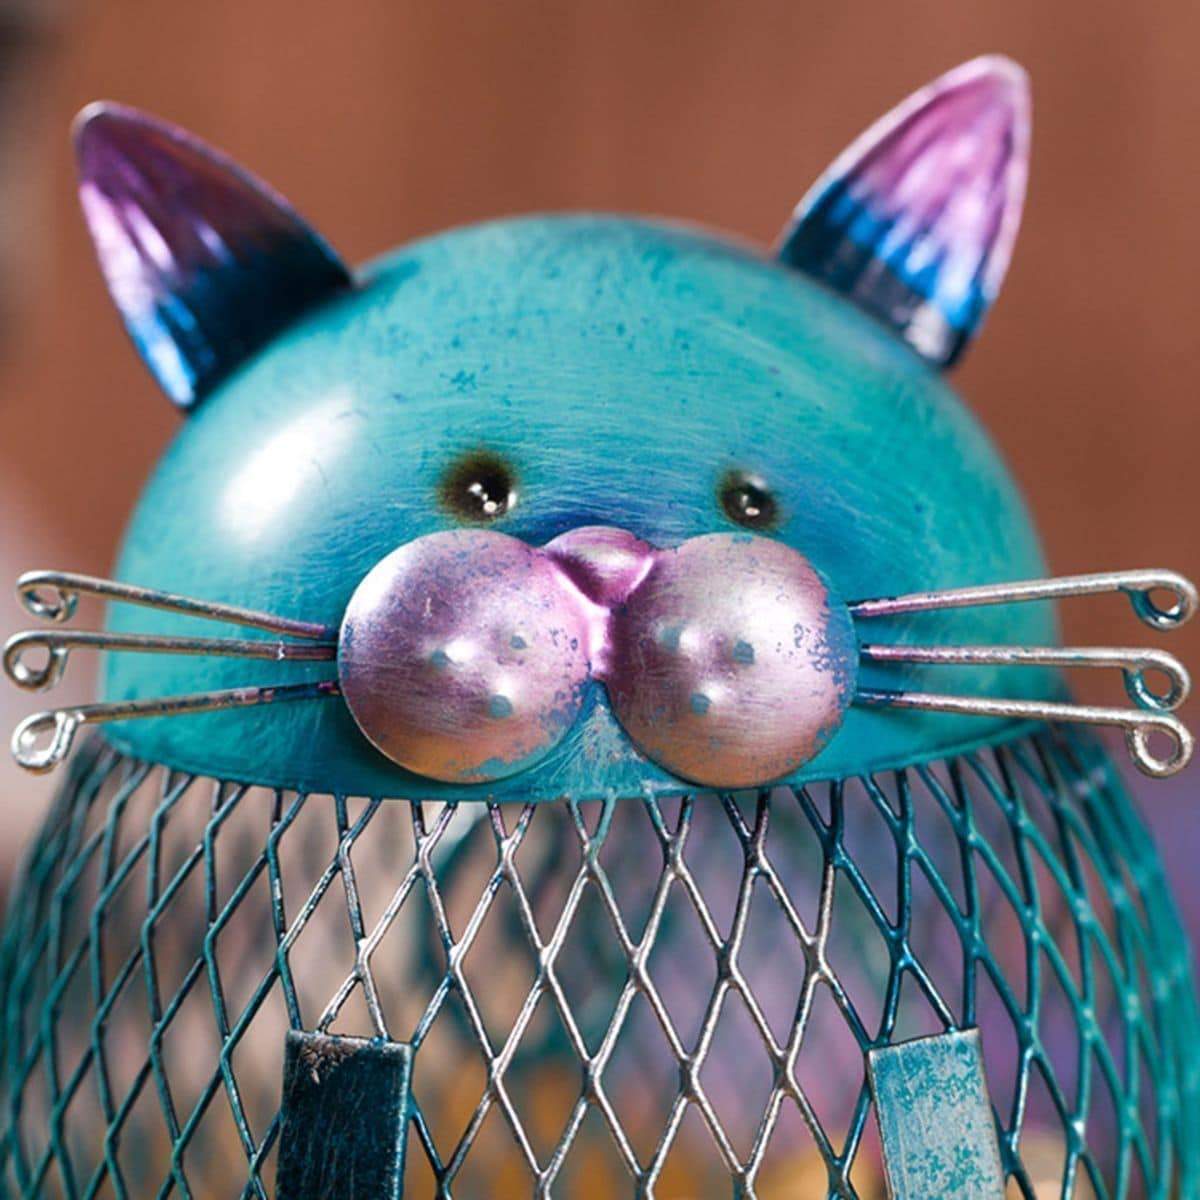 This cat coin bank features beautful hand crafted details, such as a cat's ears, whiskers, nose and eyes.